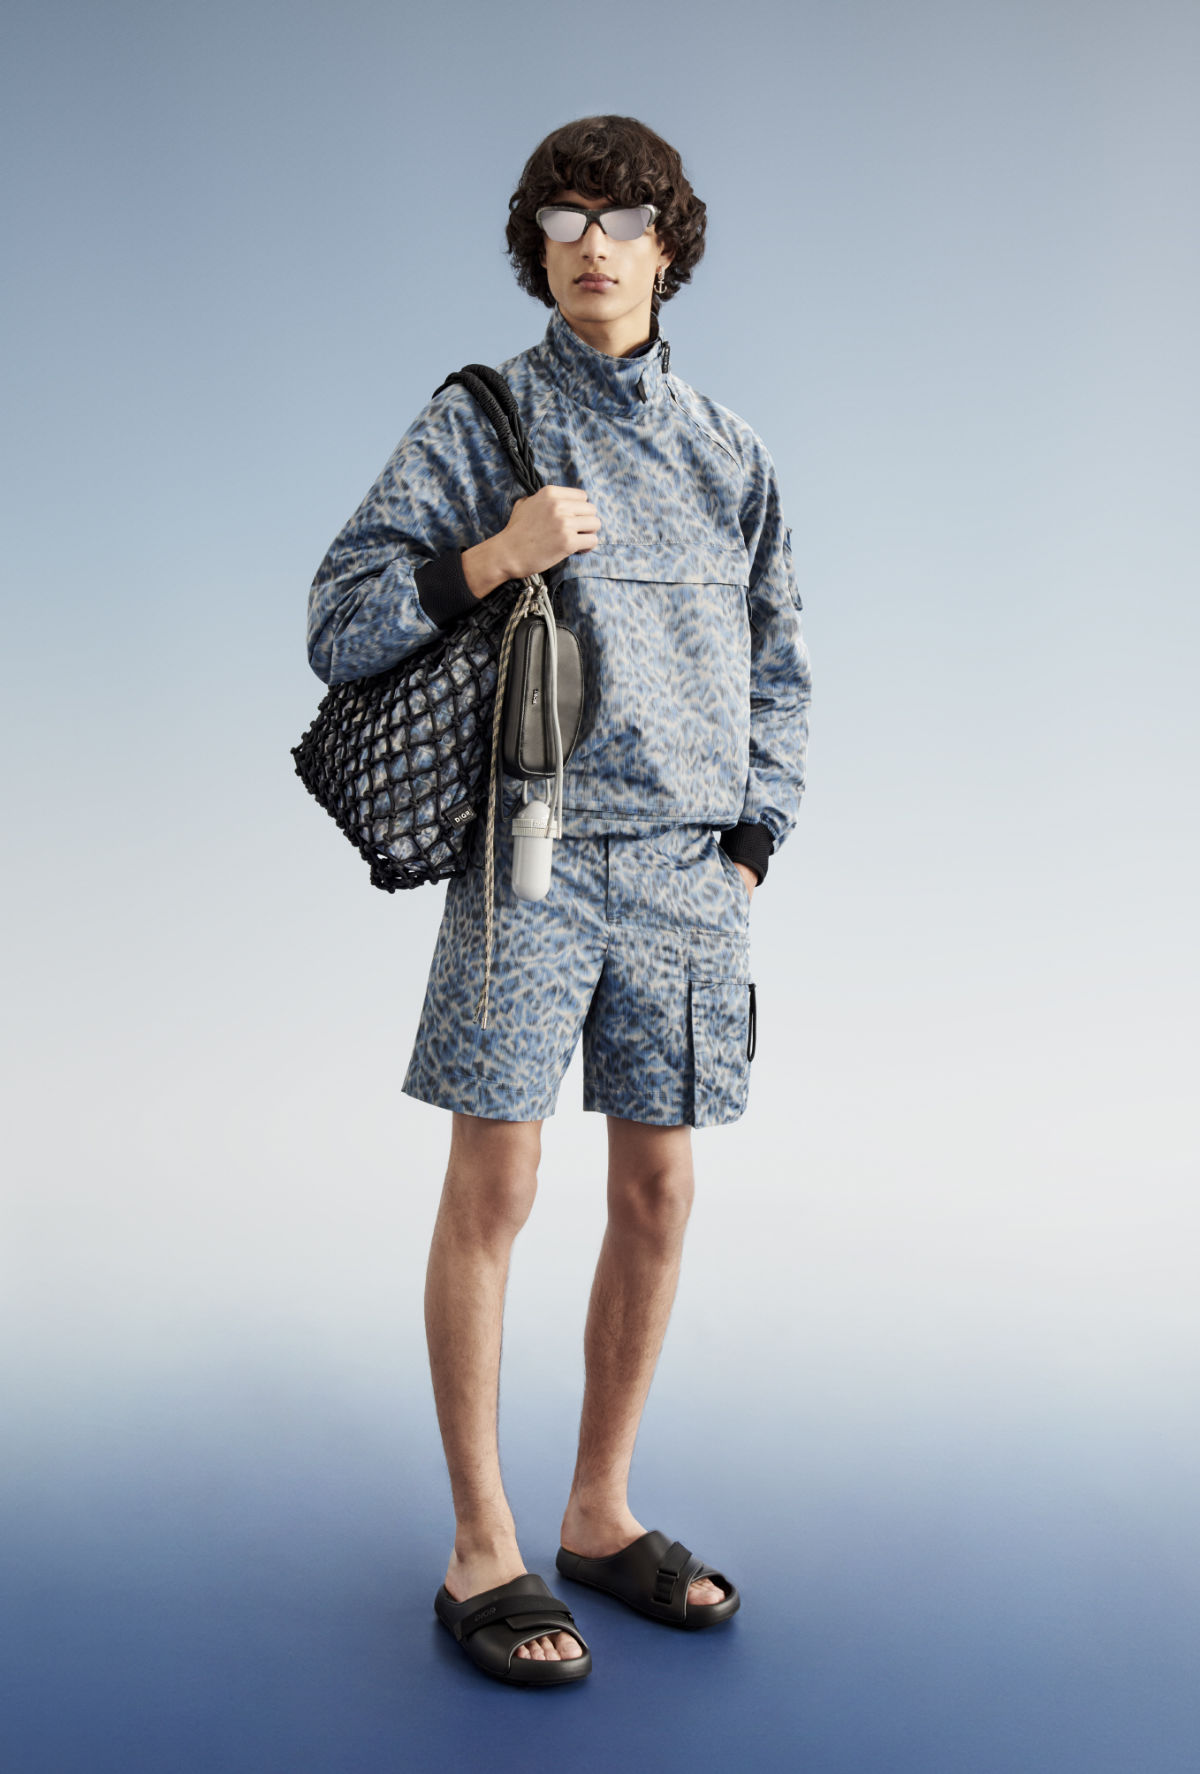 Dior Presents Its New Men's Beachwear Capsule 2022 Collection